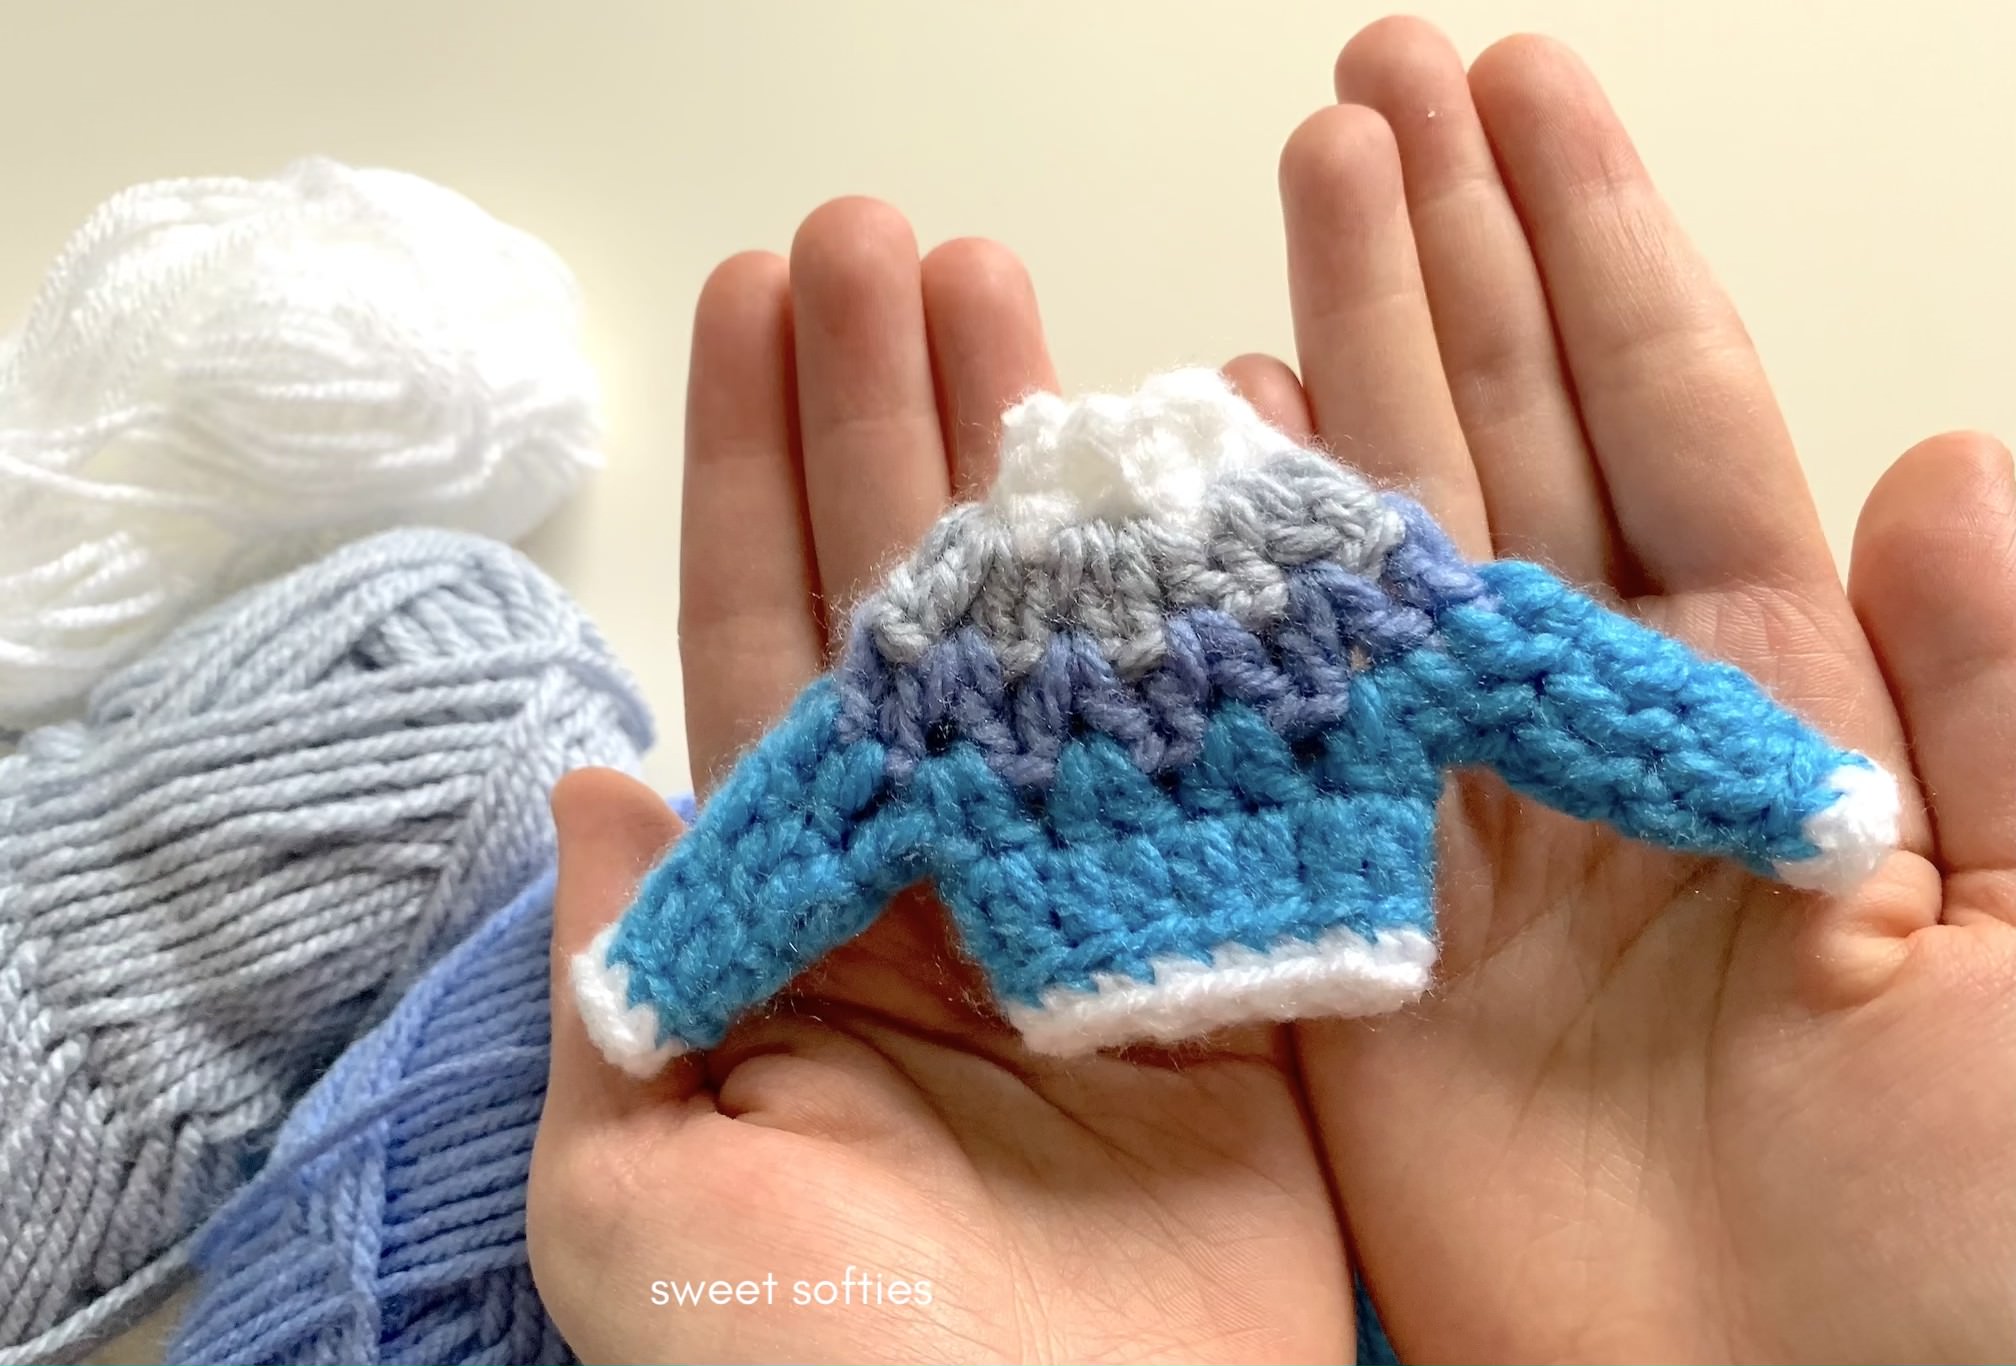 Online How to Crochet a Sweater for a Stuffed Animal Course